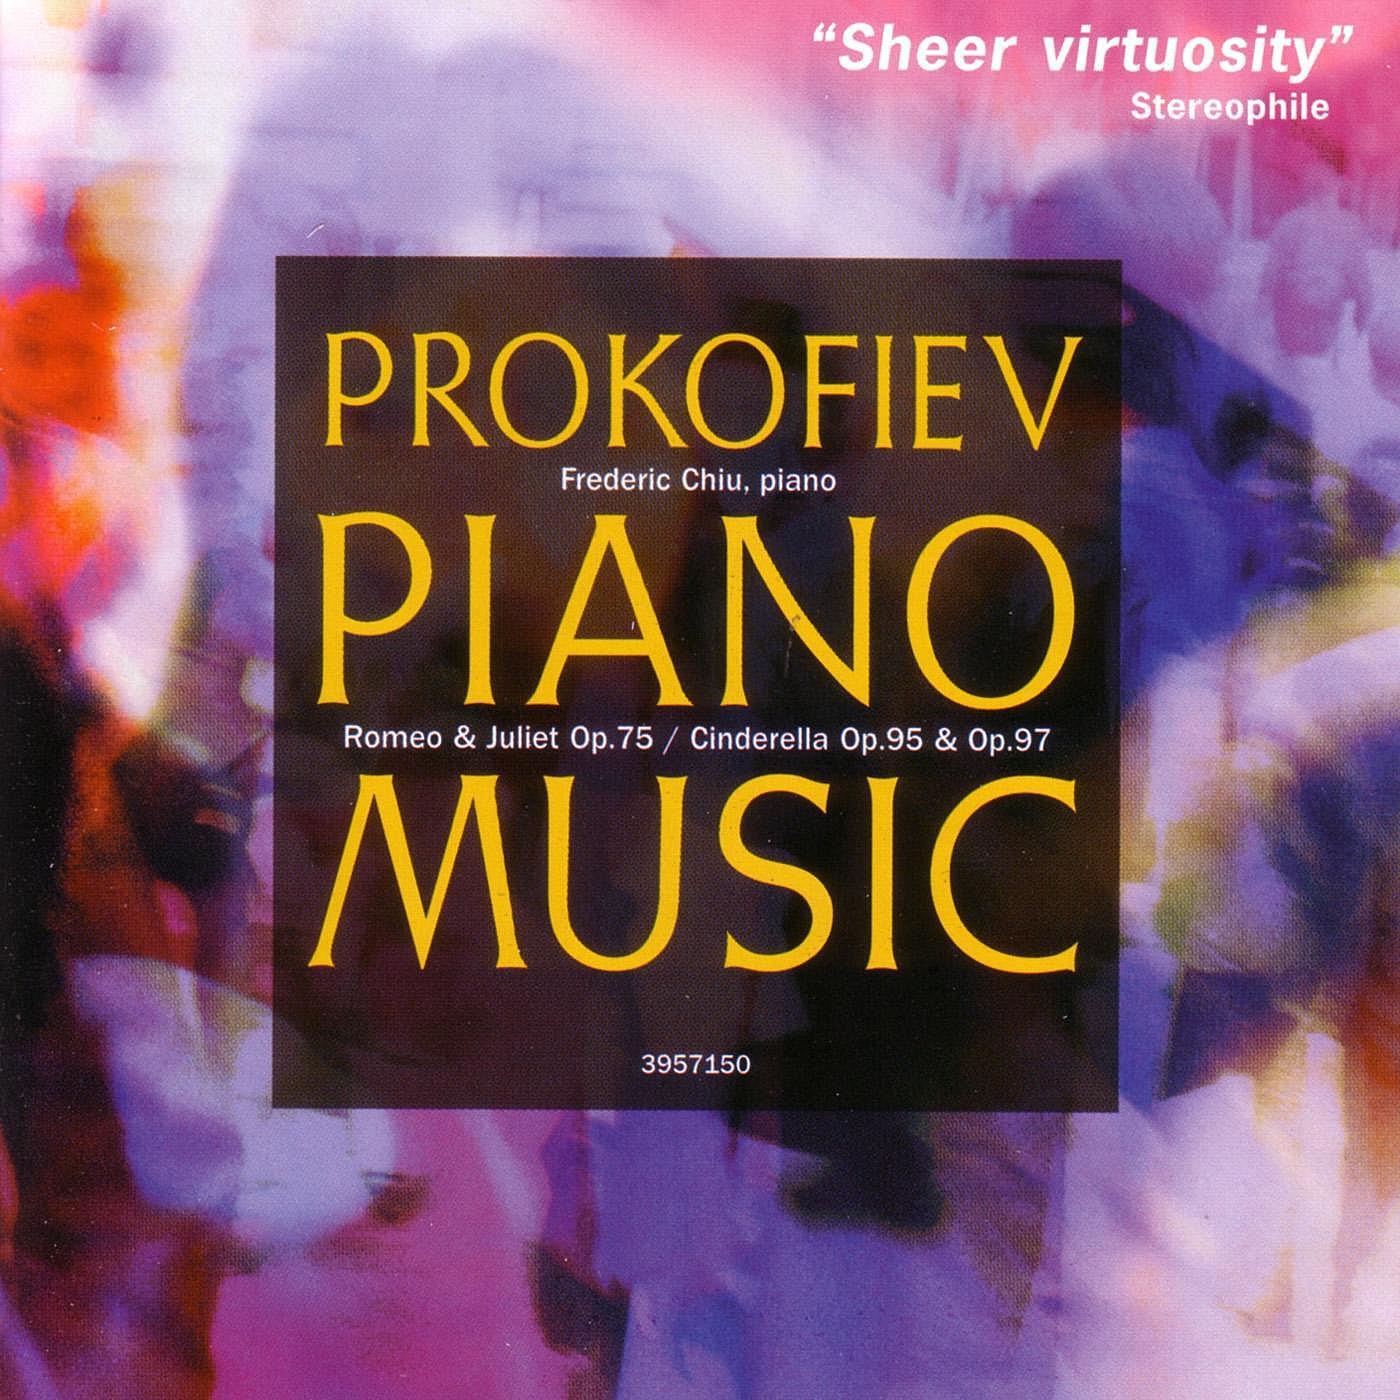 Three Pieces for Piano, Op. 96: II. Contredanse intended for "Lermontov"